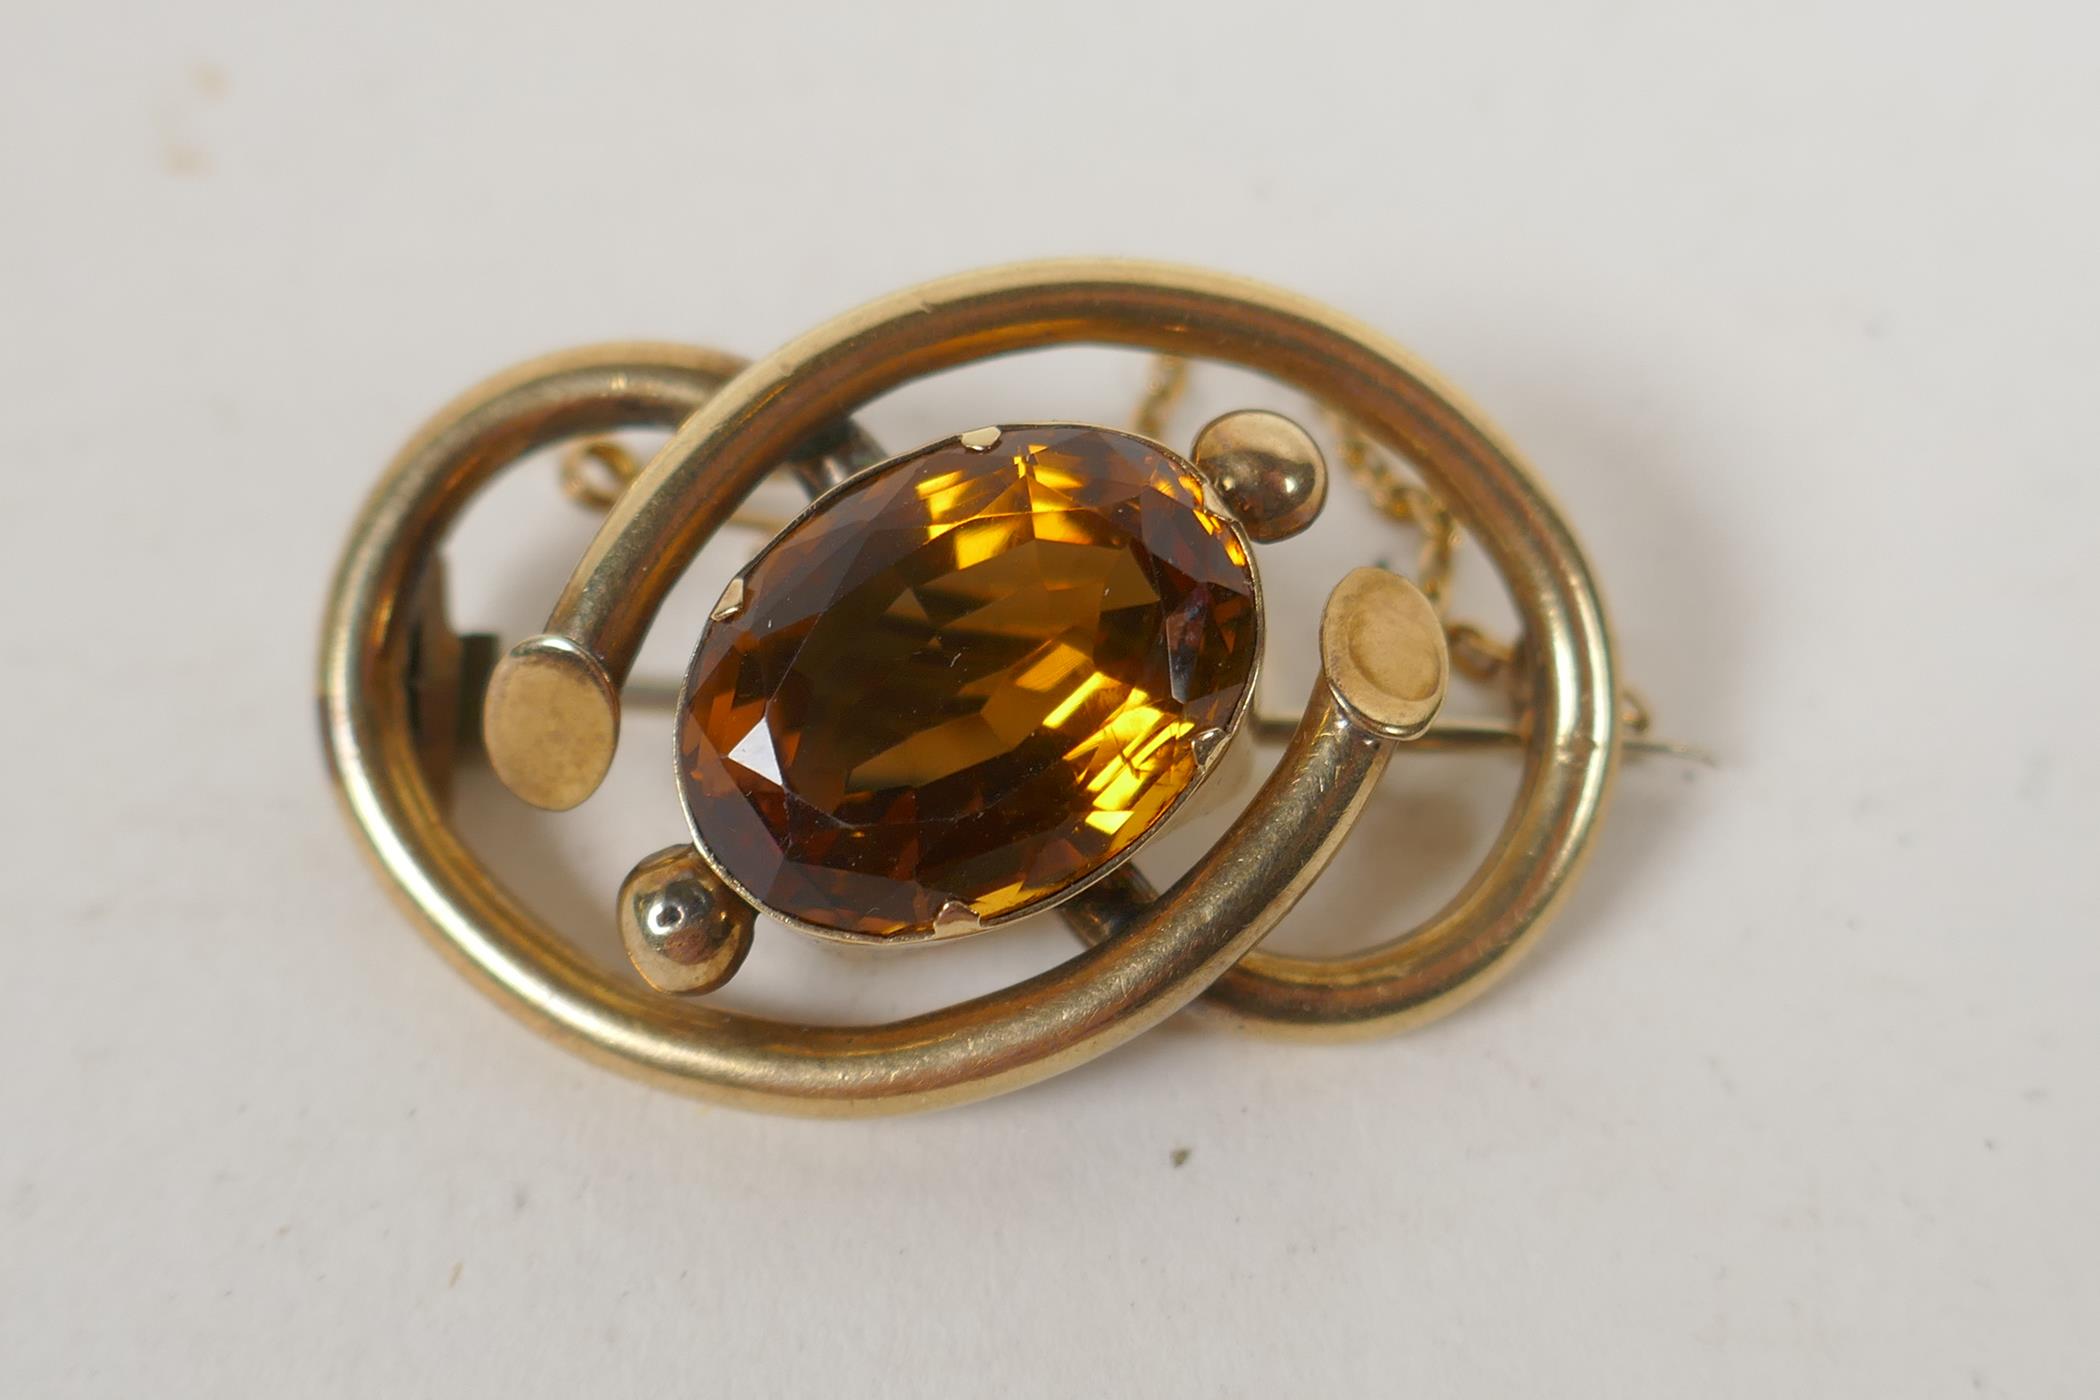 An antique yellow metal brooch set with a large citrine stone, 11g groos